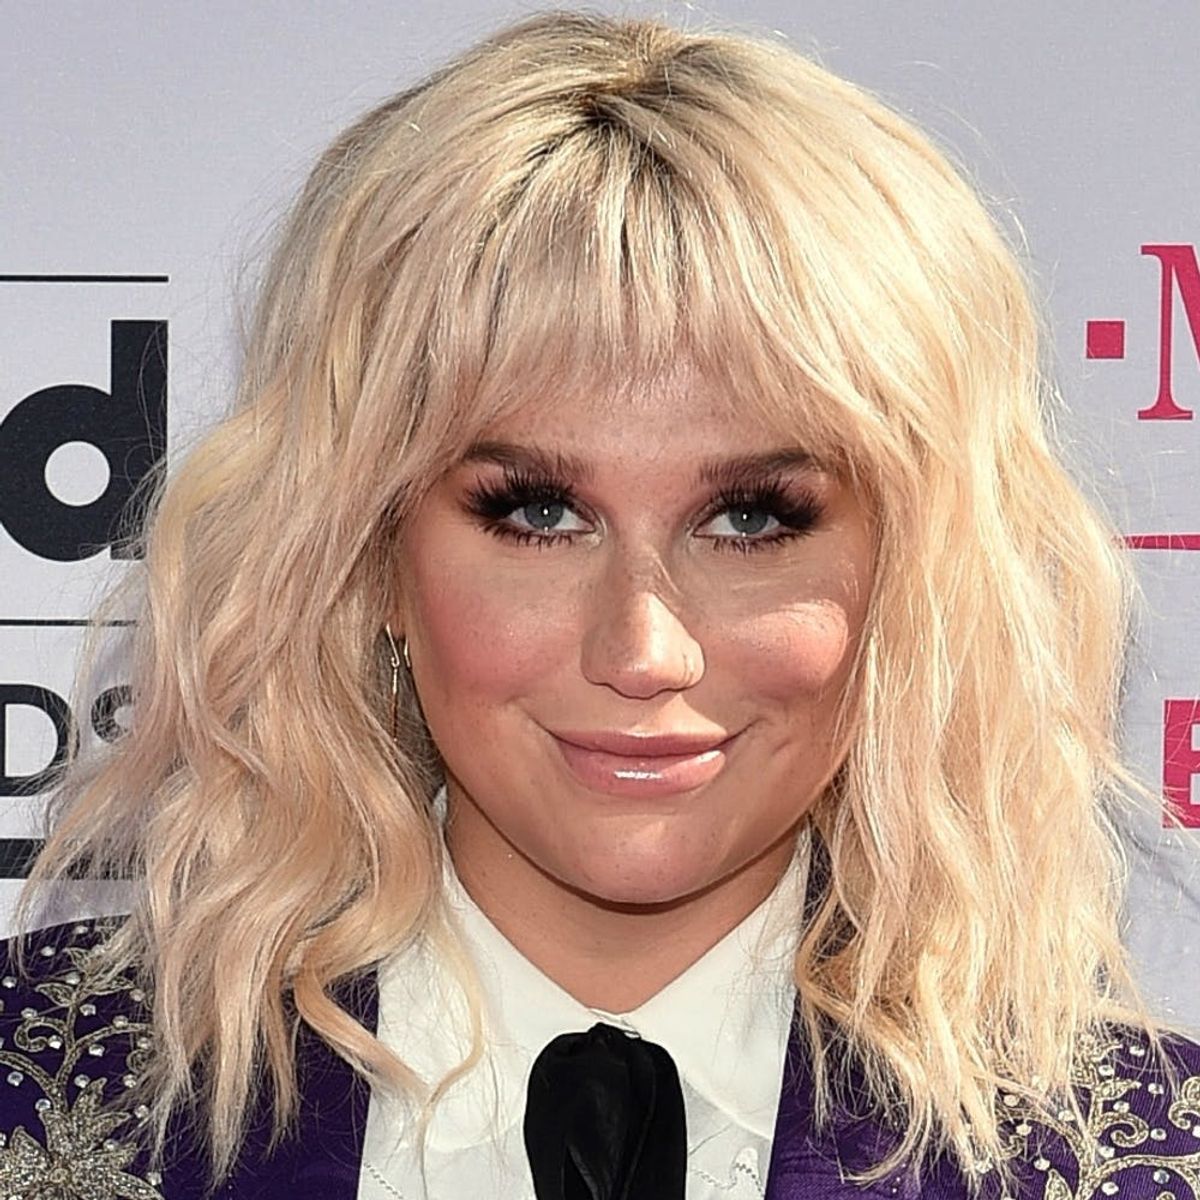 This Is the Lazy Girl Hair Look That Dominated the 2016 Billboard Music Awards